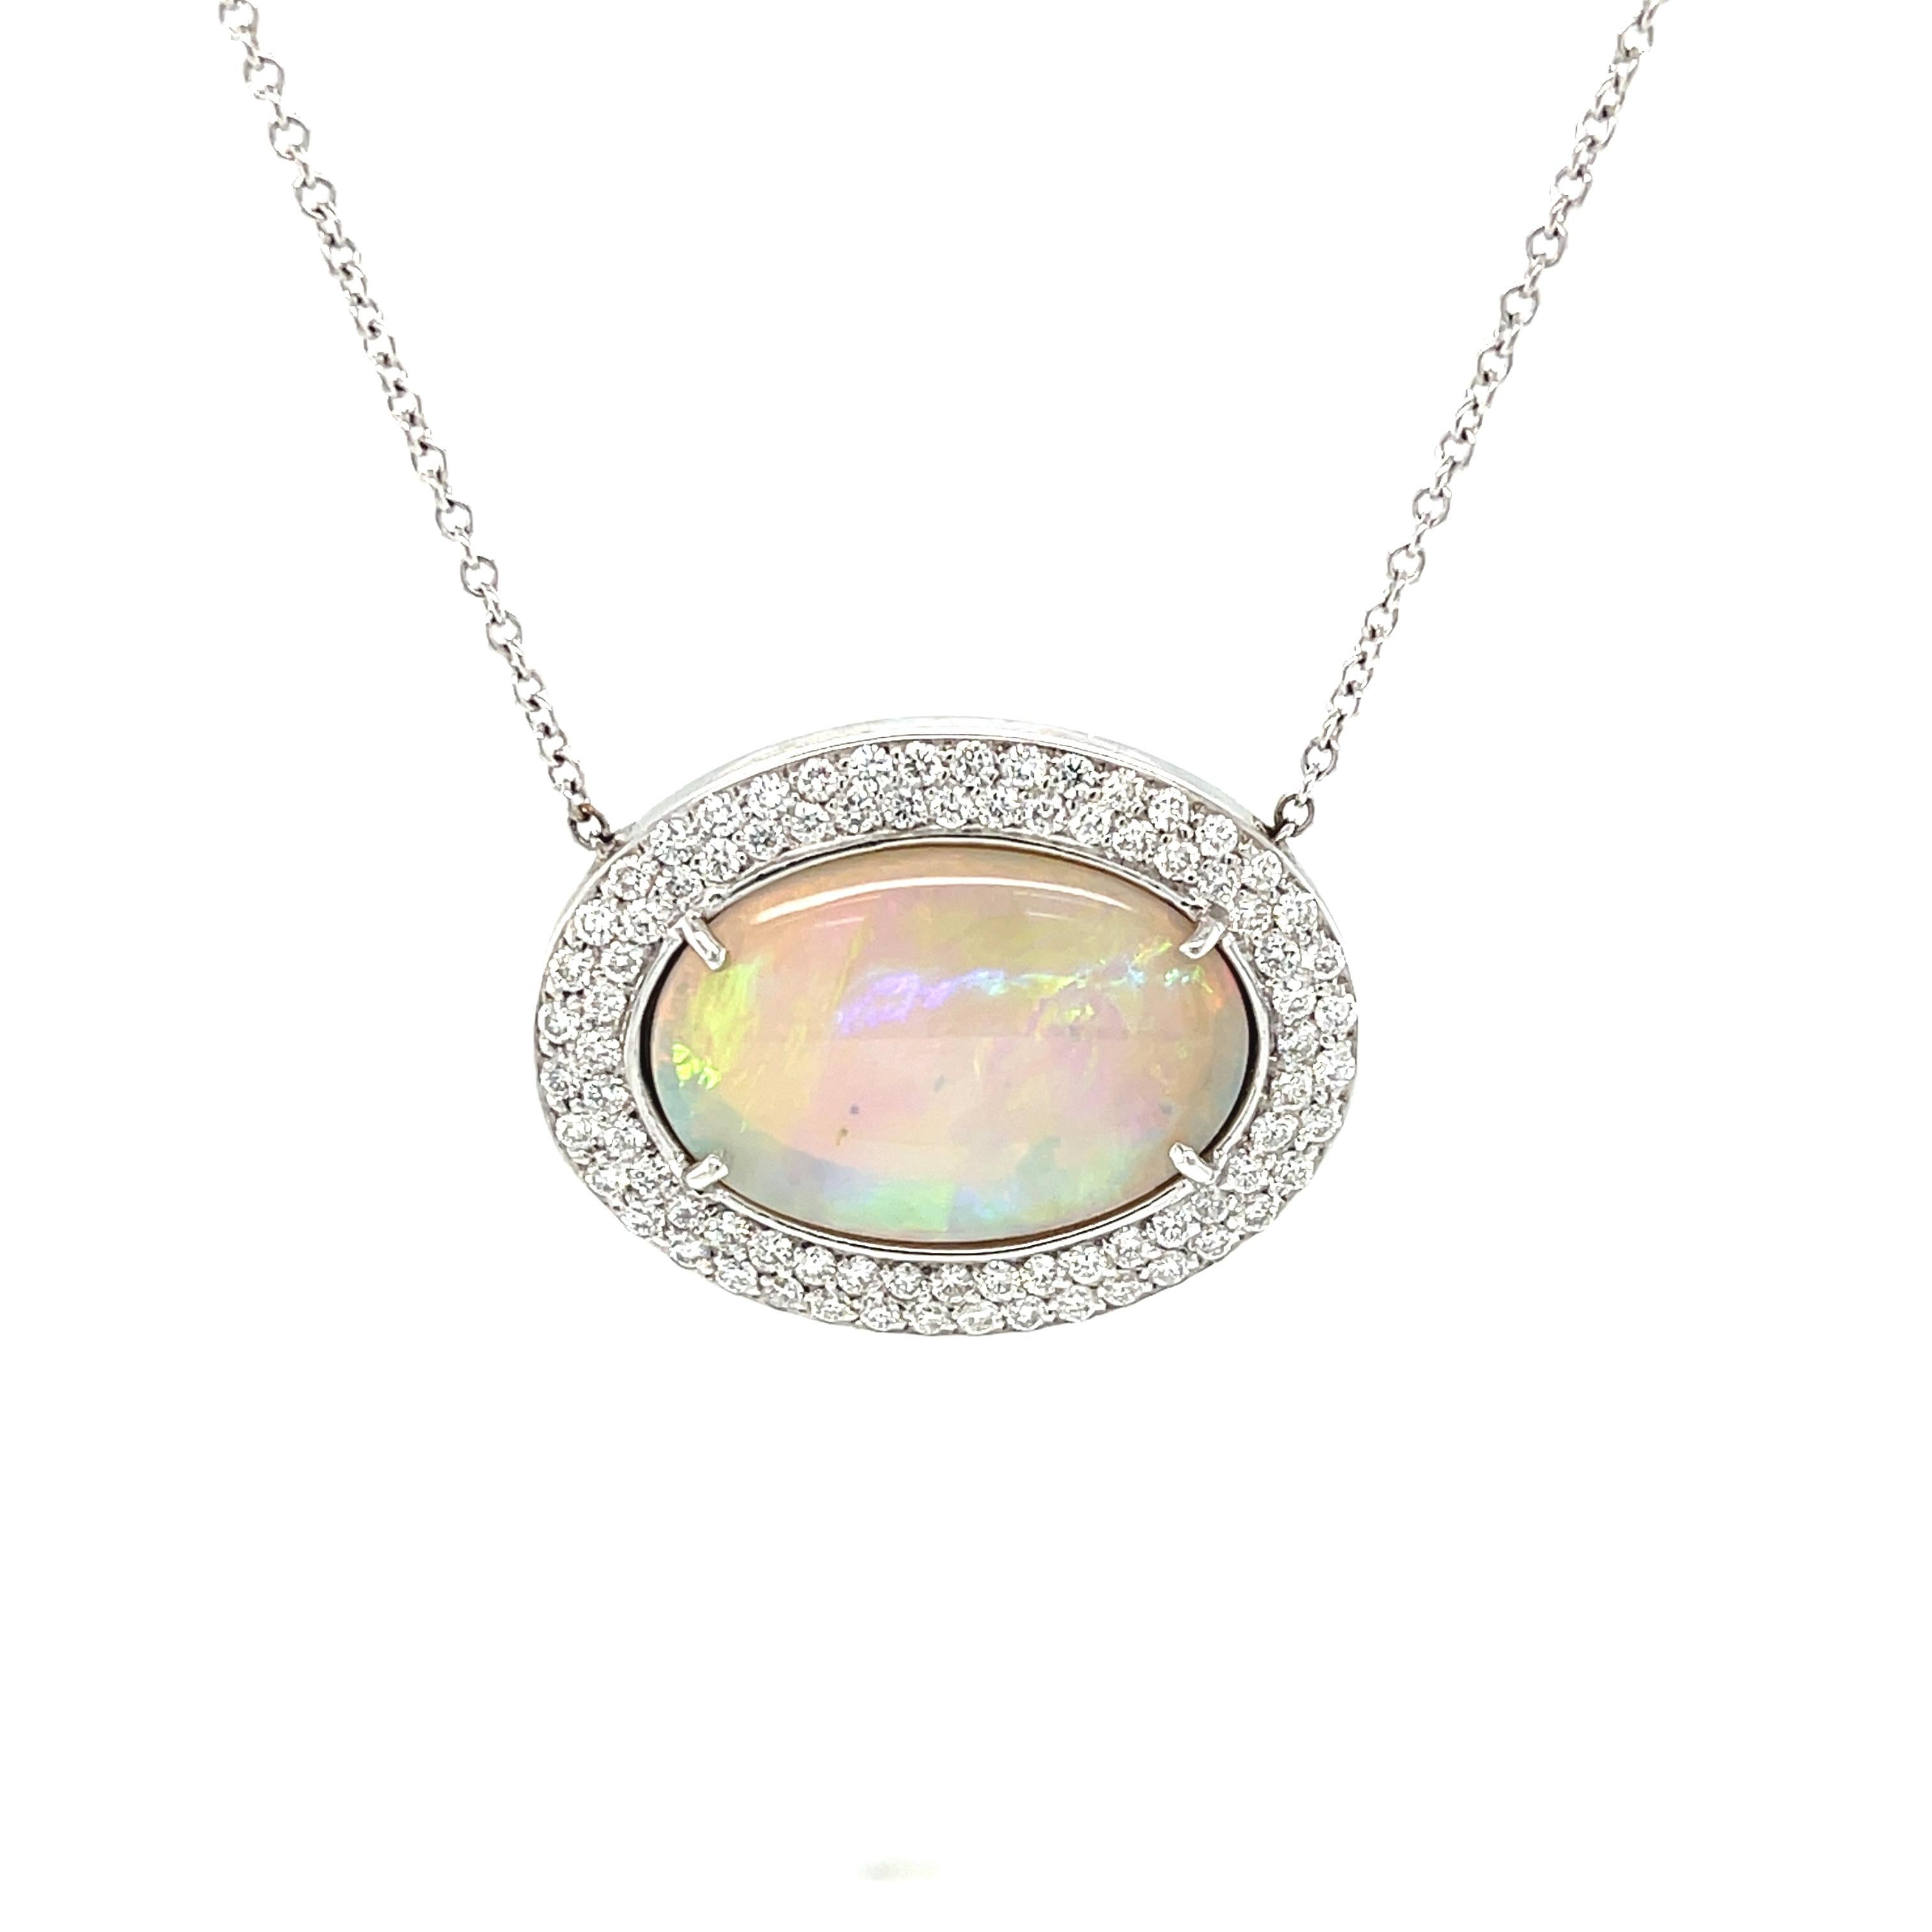 This gorgeous necklace will go with everything! It features a large, beautiful Australian opal that displays striking patches of red, yellow, orange, green and violet play-of-color or 